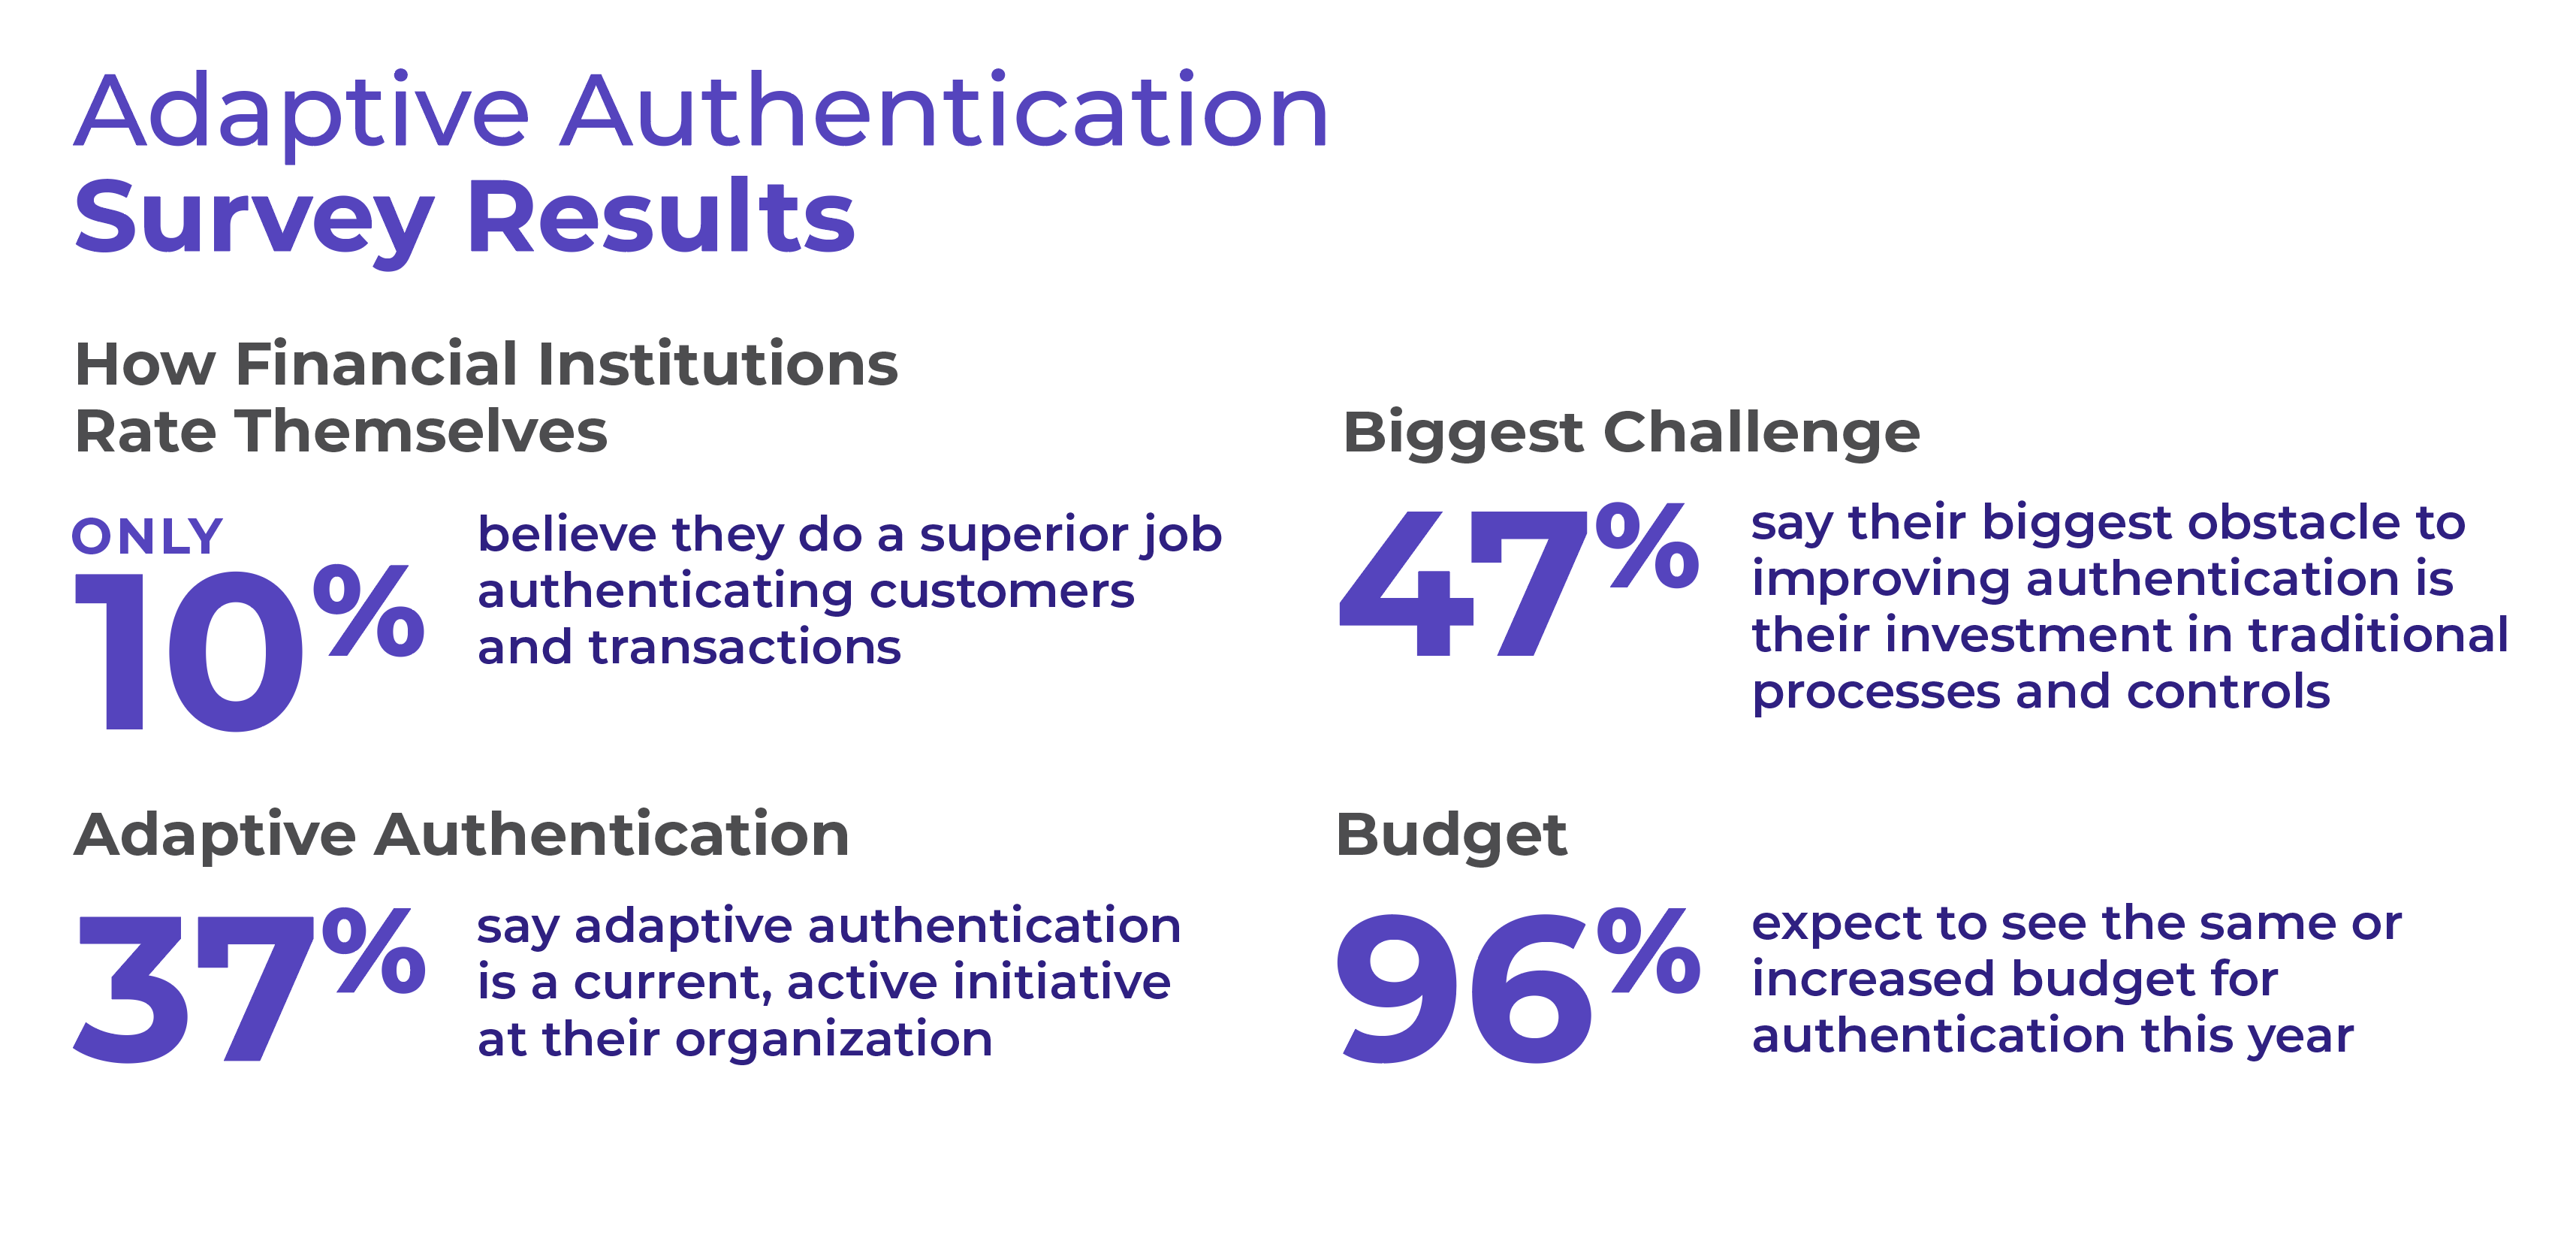 Adaptive Authentication Survey Results